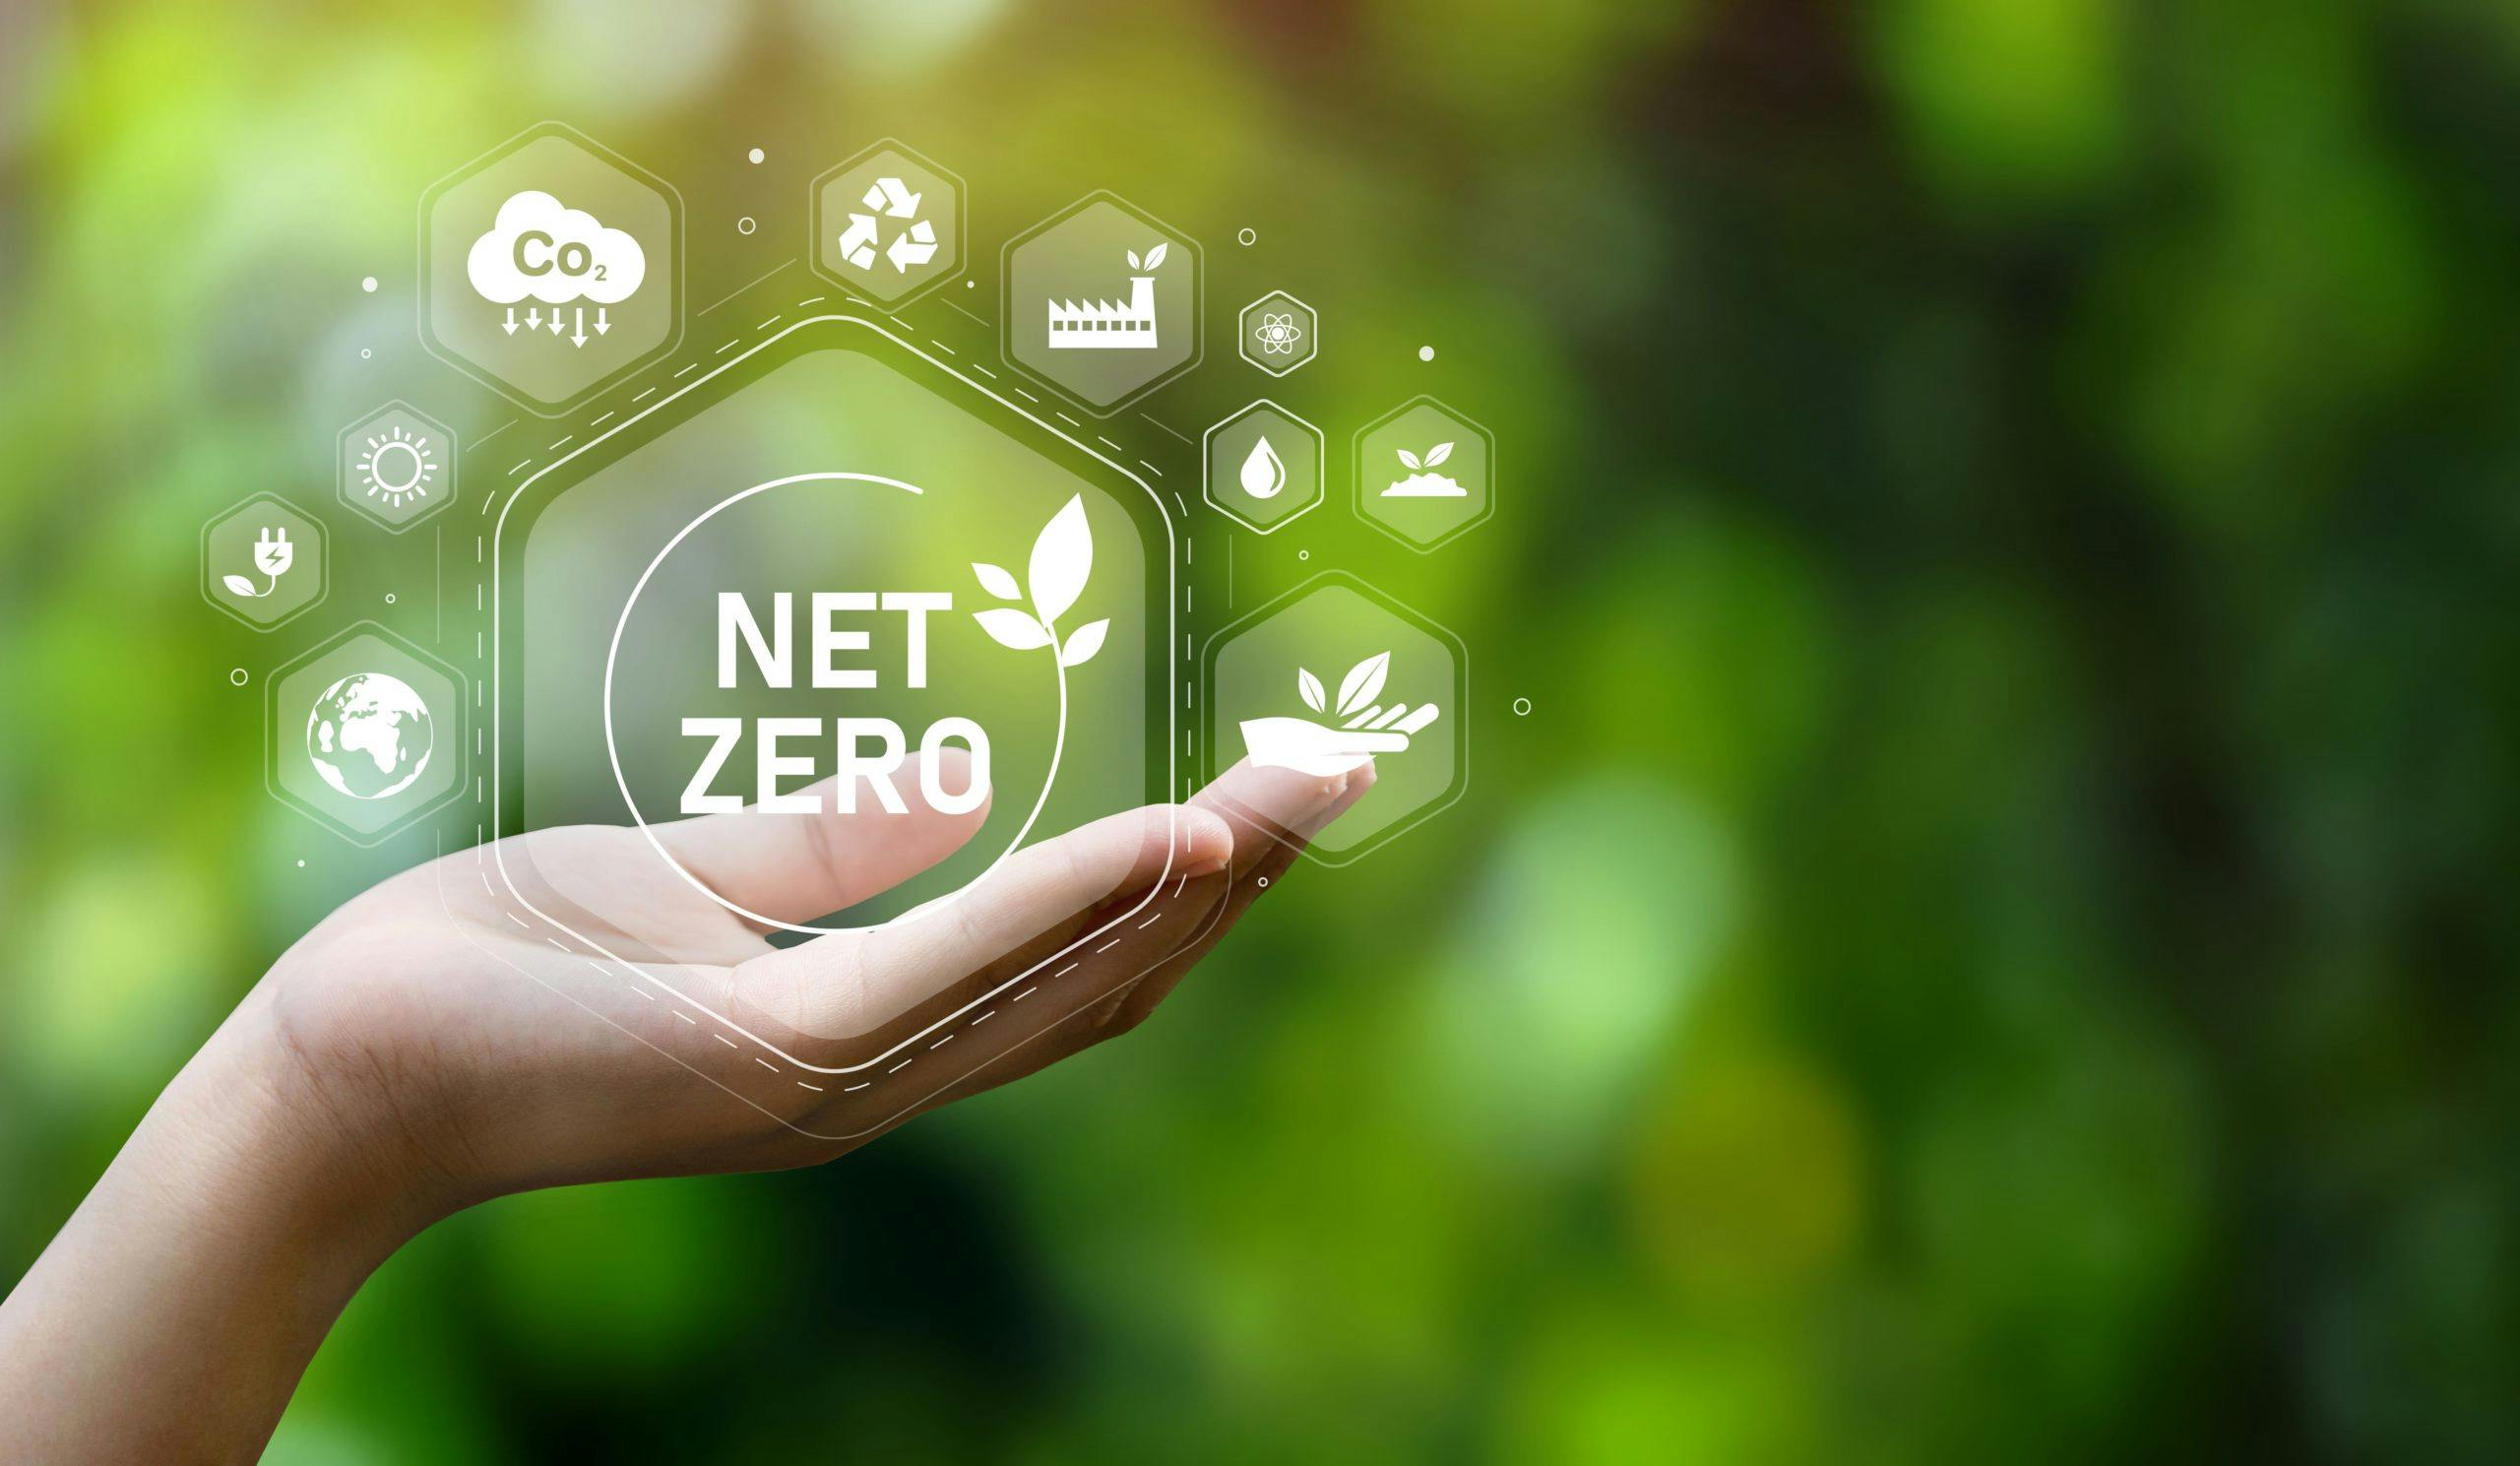 The,Concept,Of,Carbon,Neutral,And,Net,Zero.,Natural,Environment